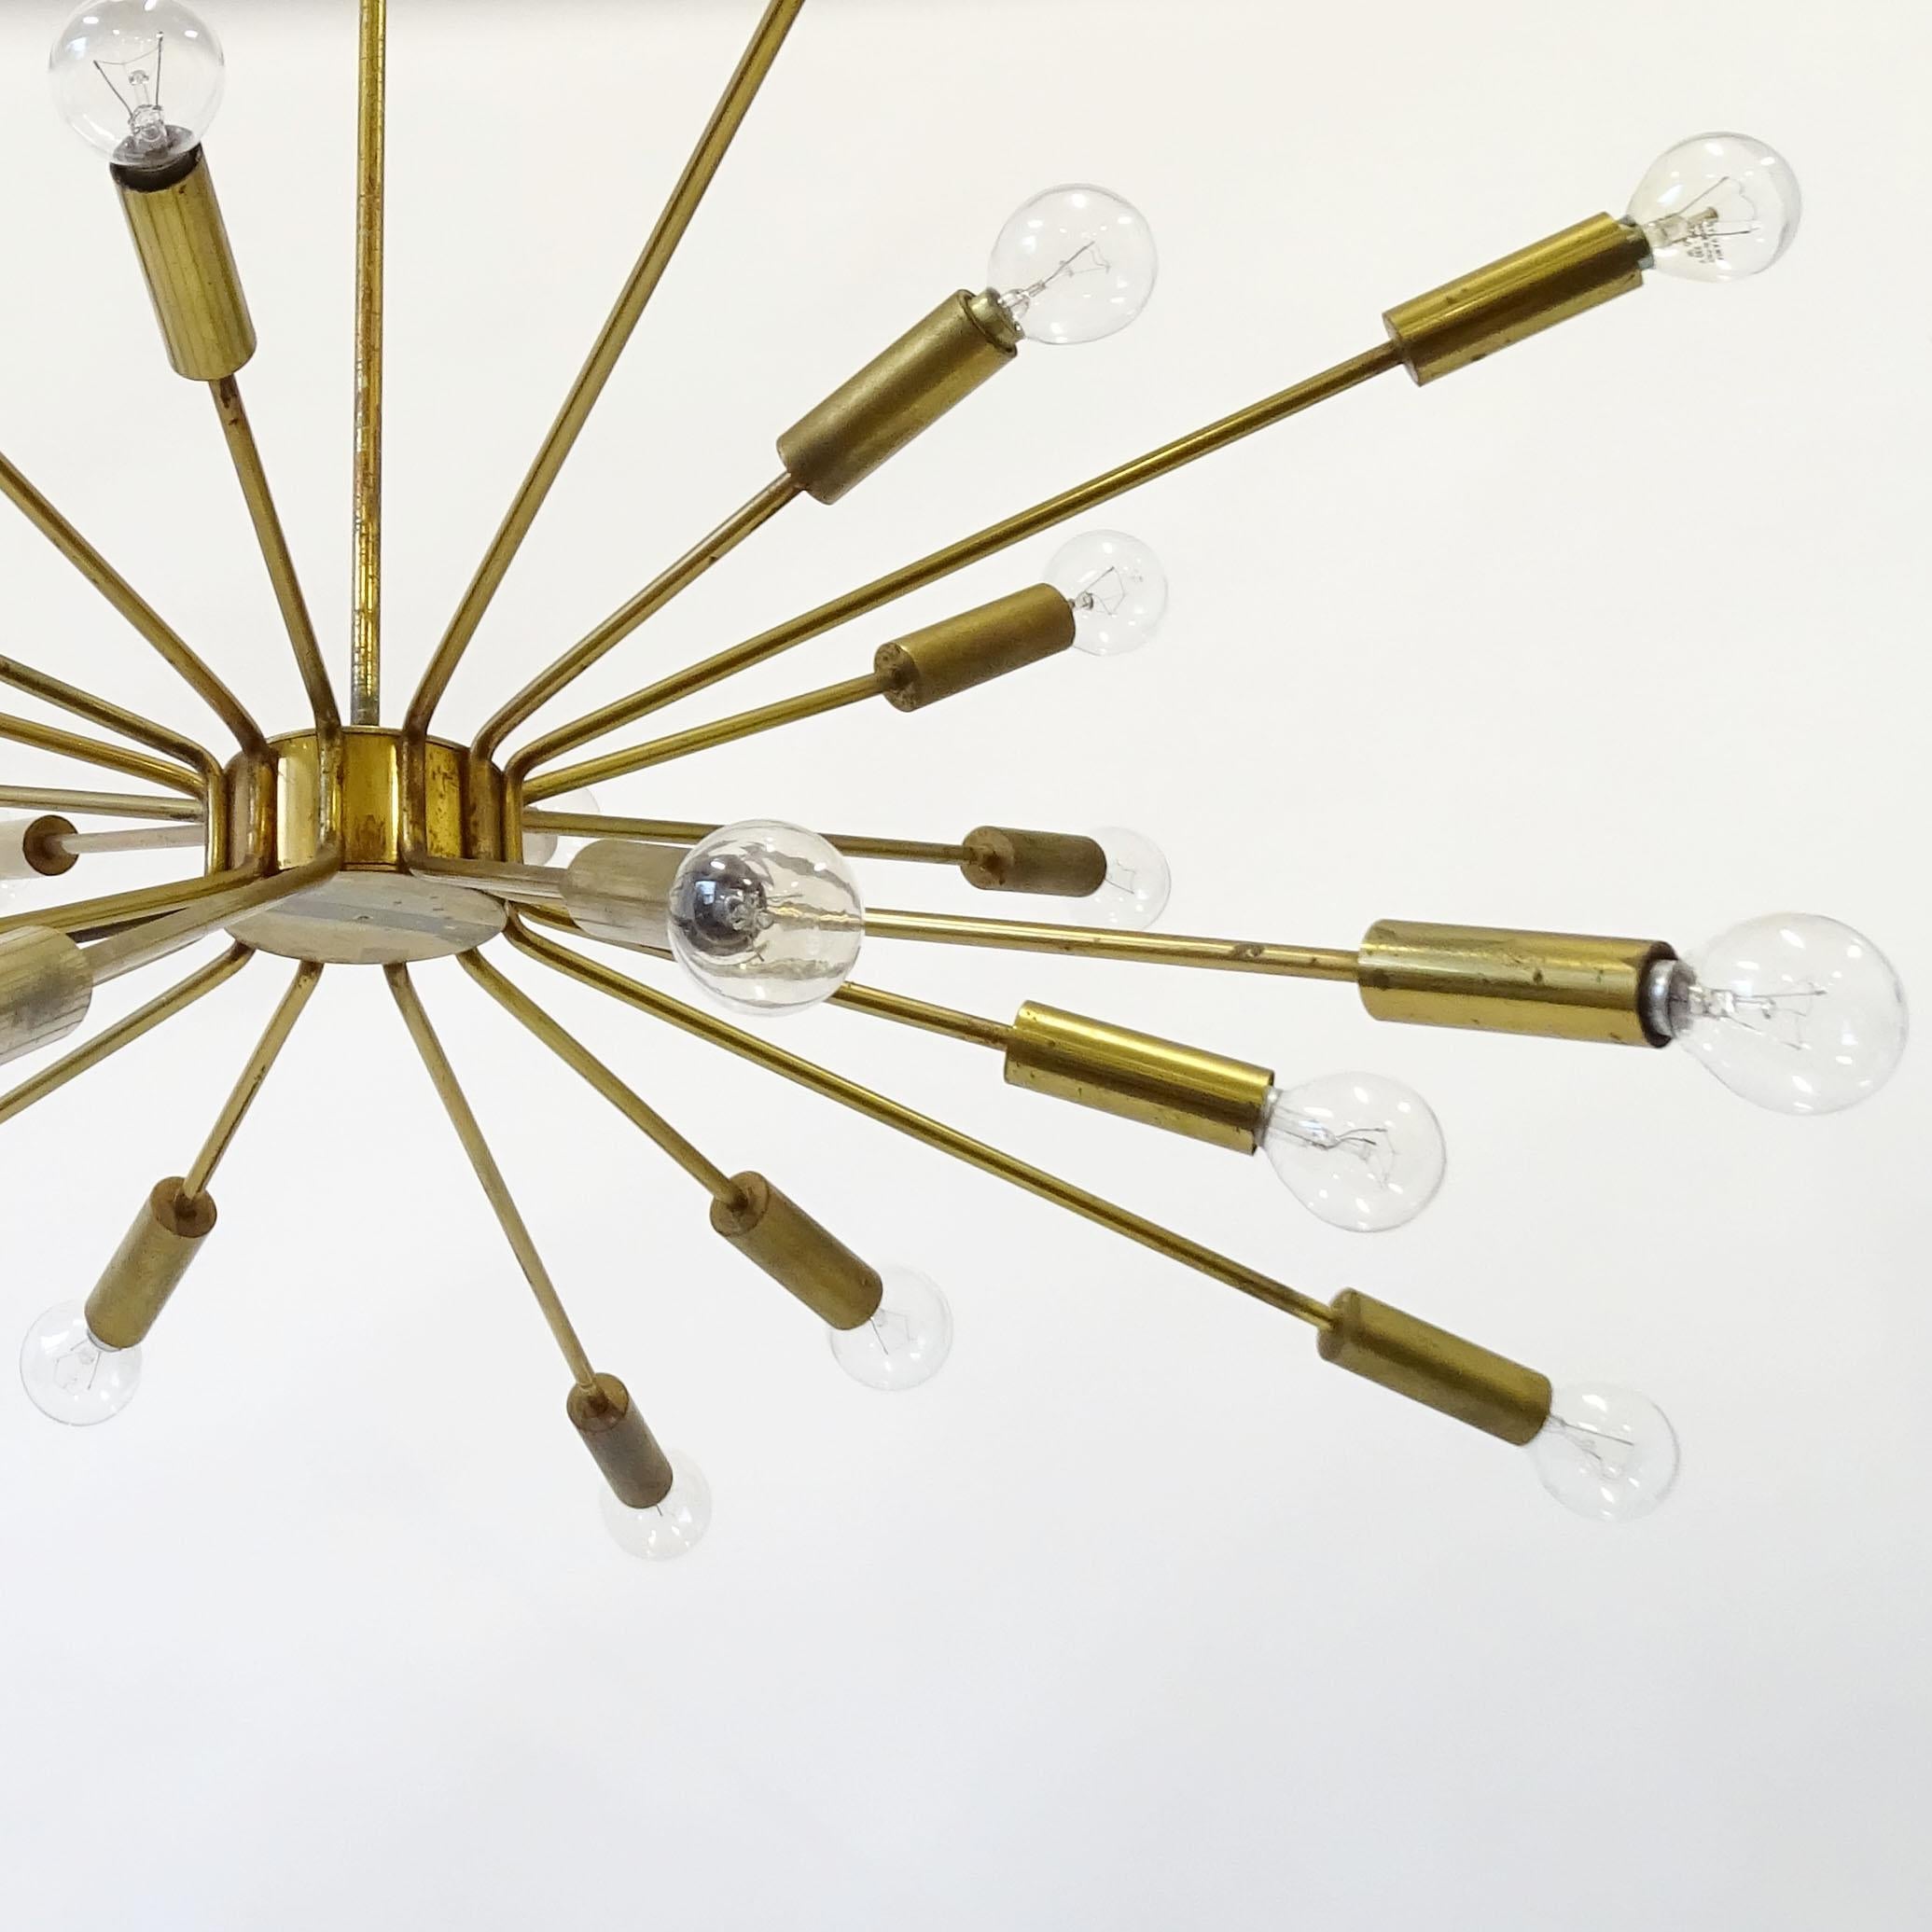 Gino Sarfatti for Arteluce 'Fireworks' Brass Ceiling Lamp, Italy 1939 For Sale 6